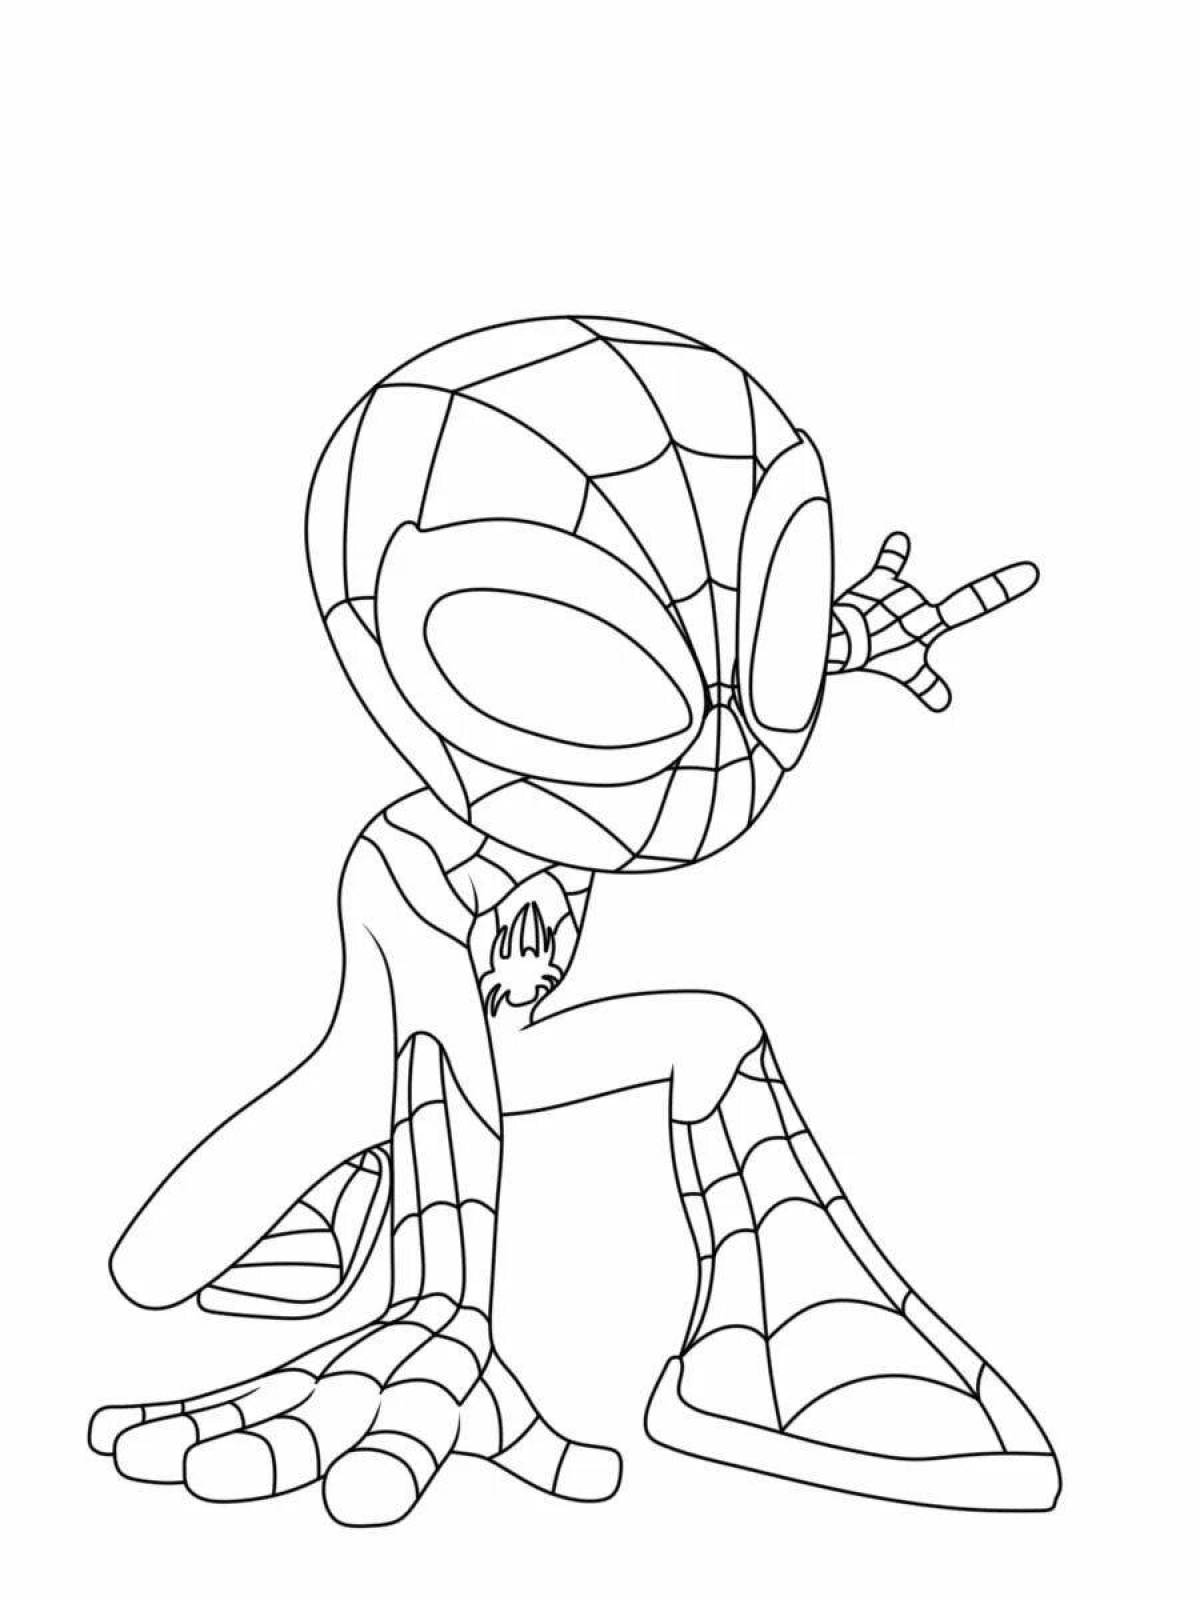 Colorful cartoon spider coloring book